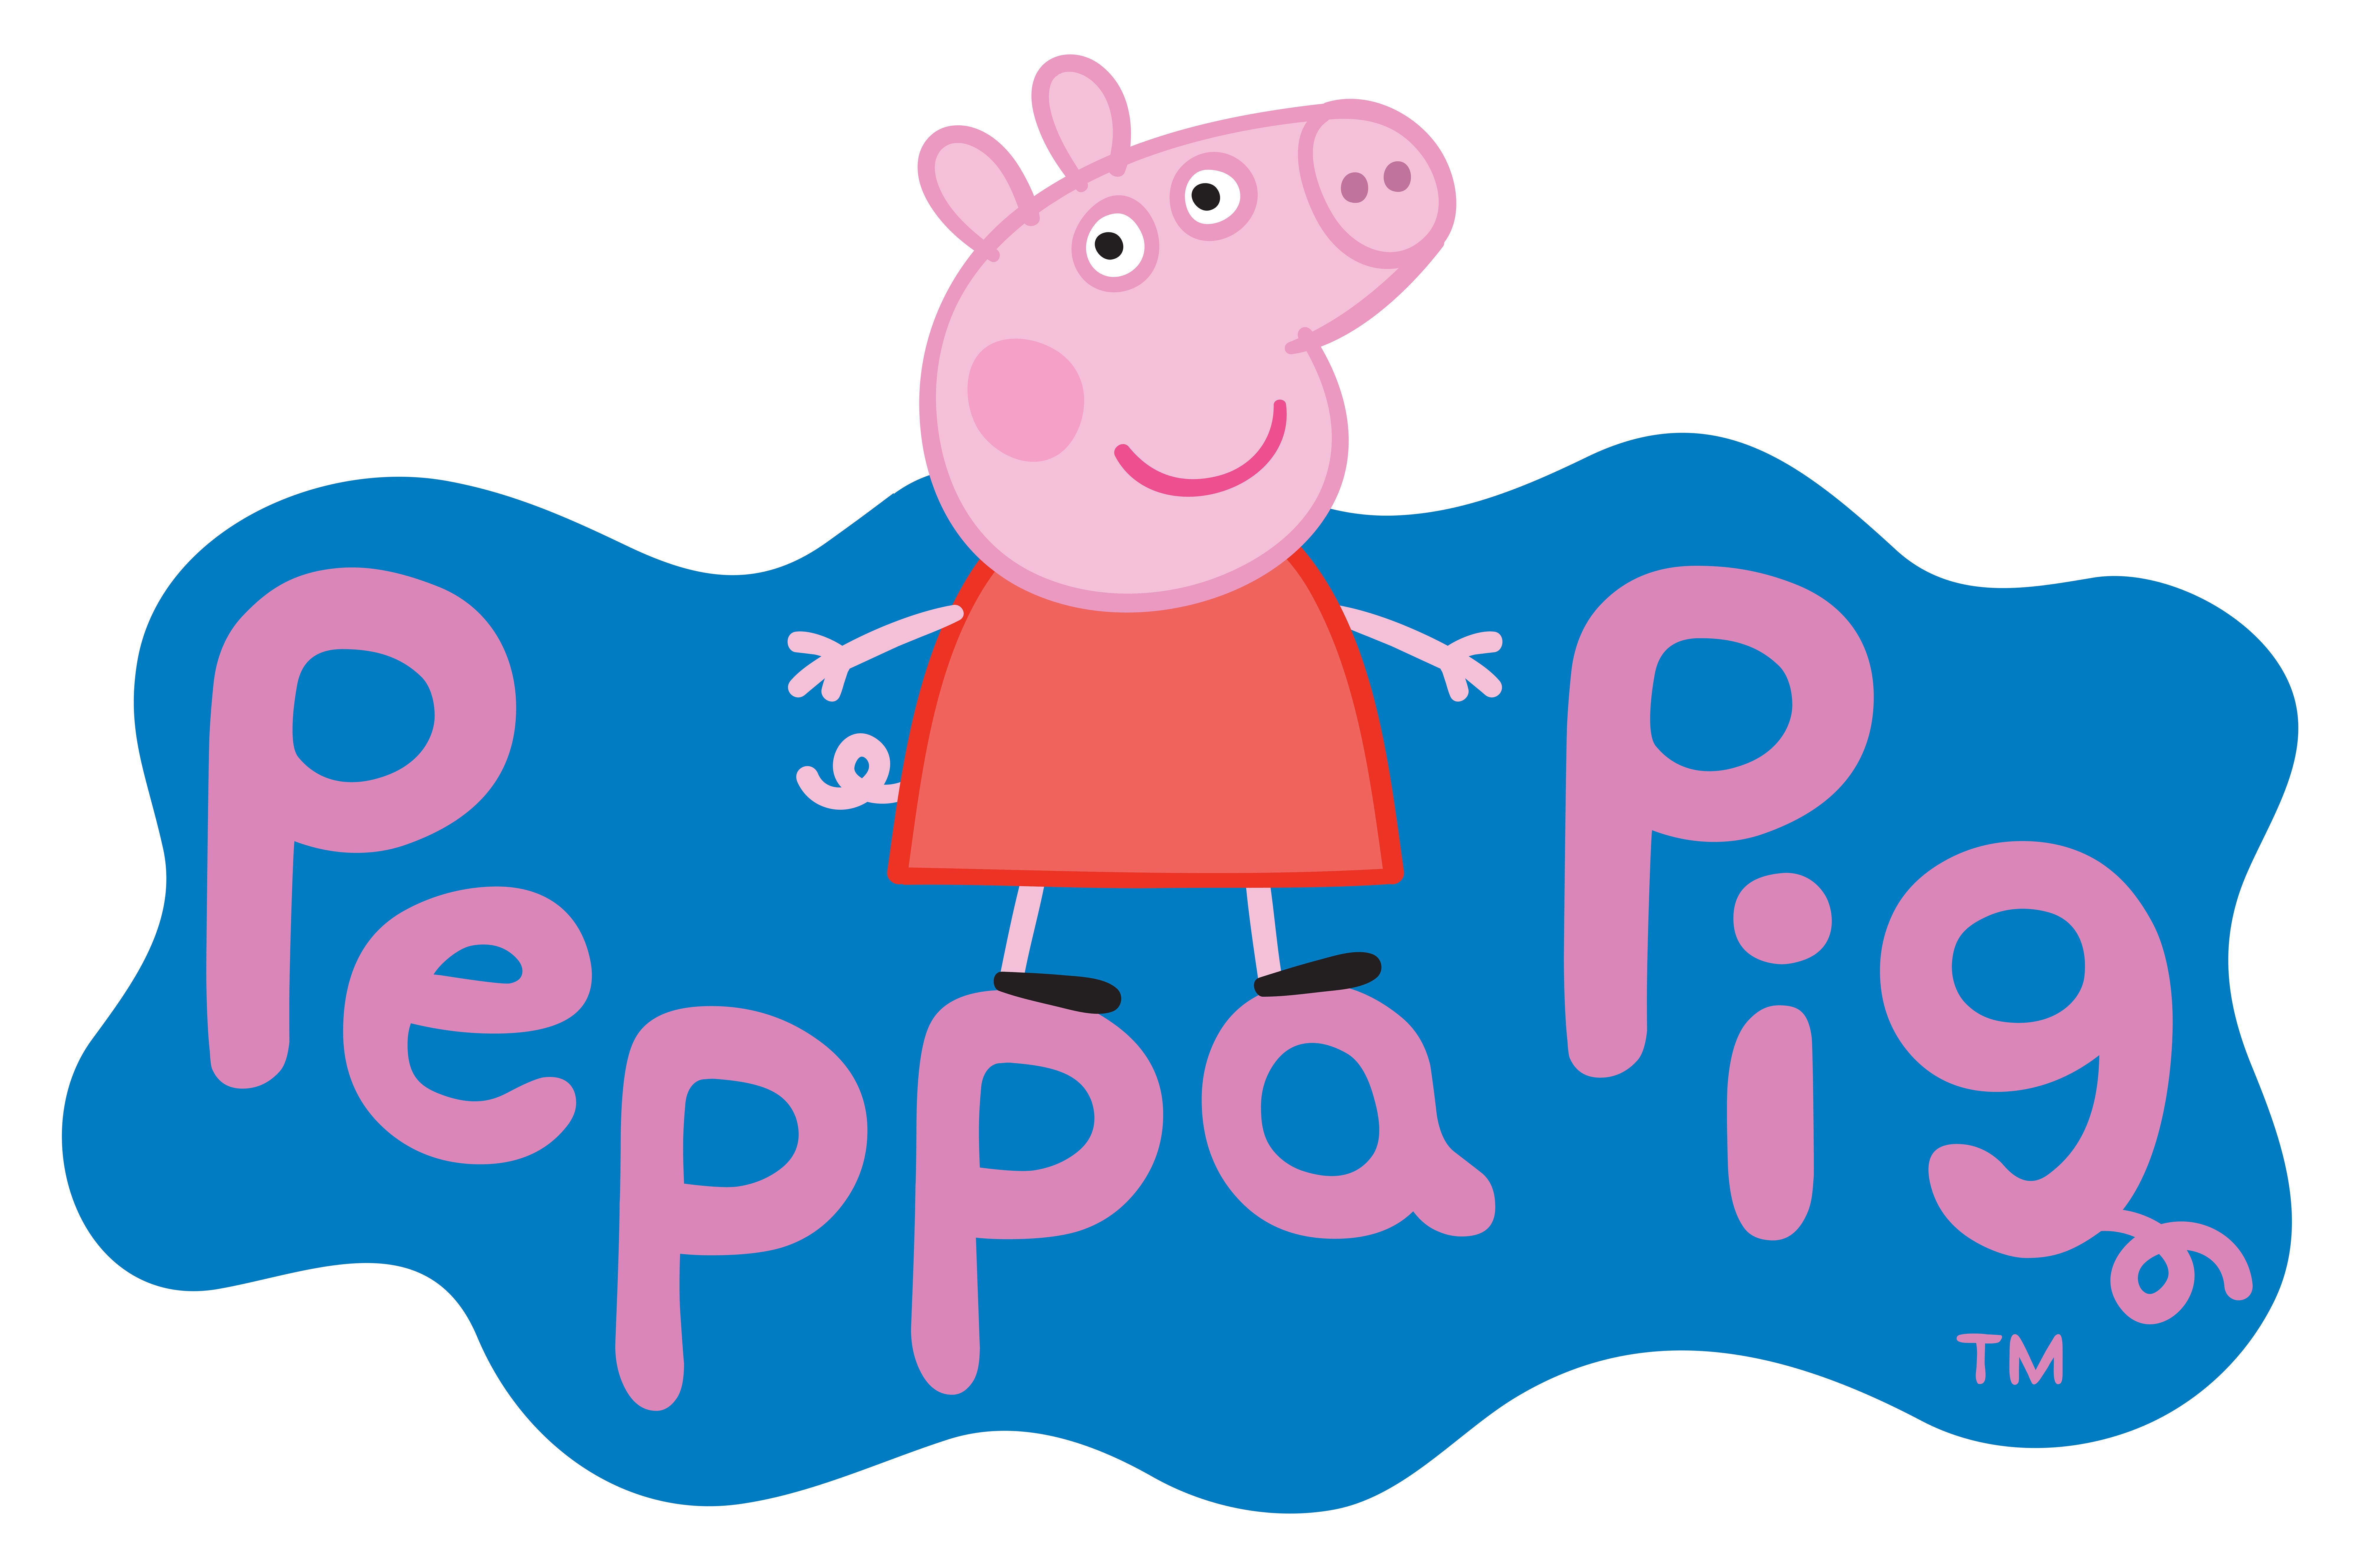 Peppa pig logo transparent. Lunchbox clipart lunch monitor